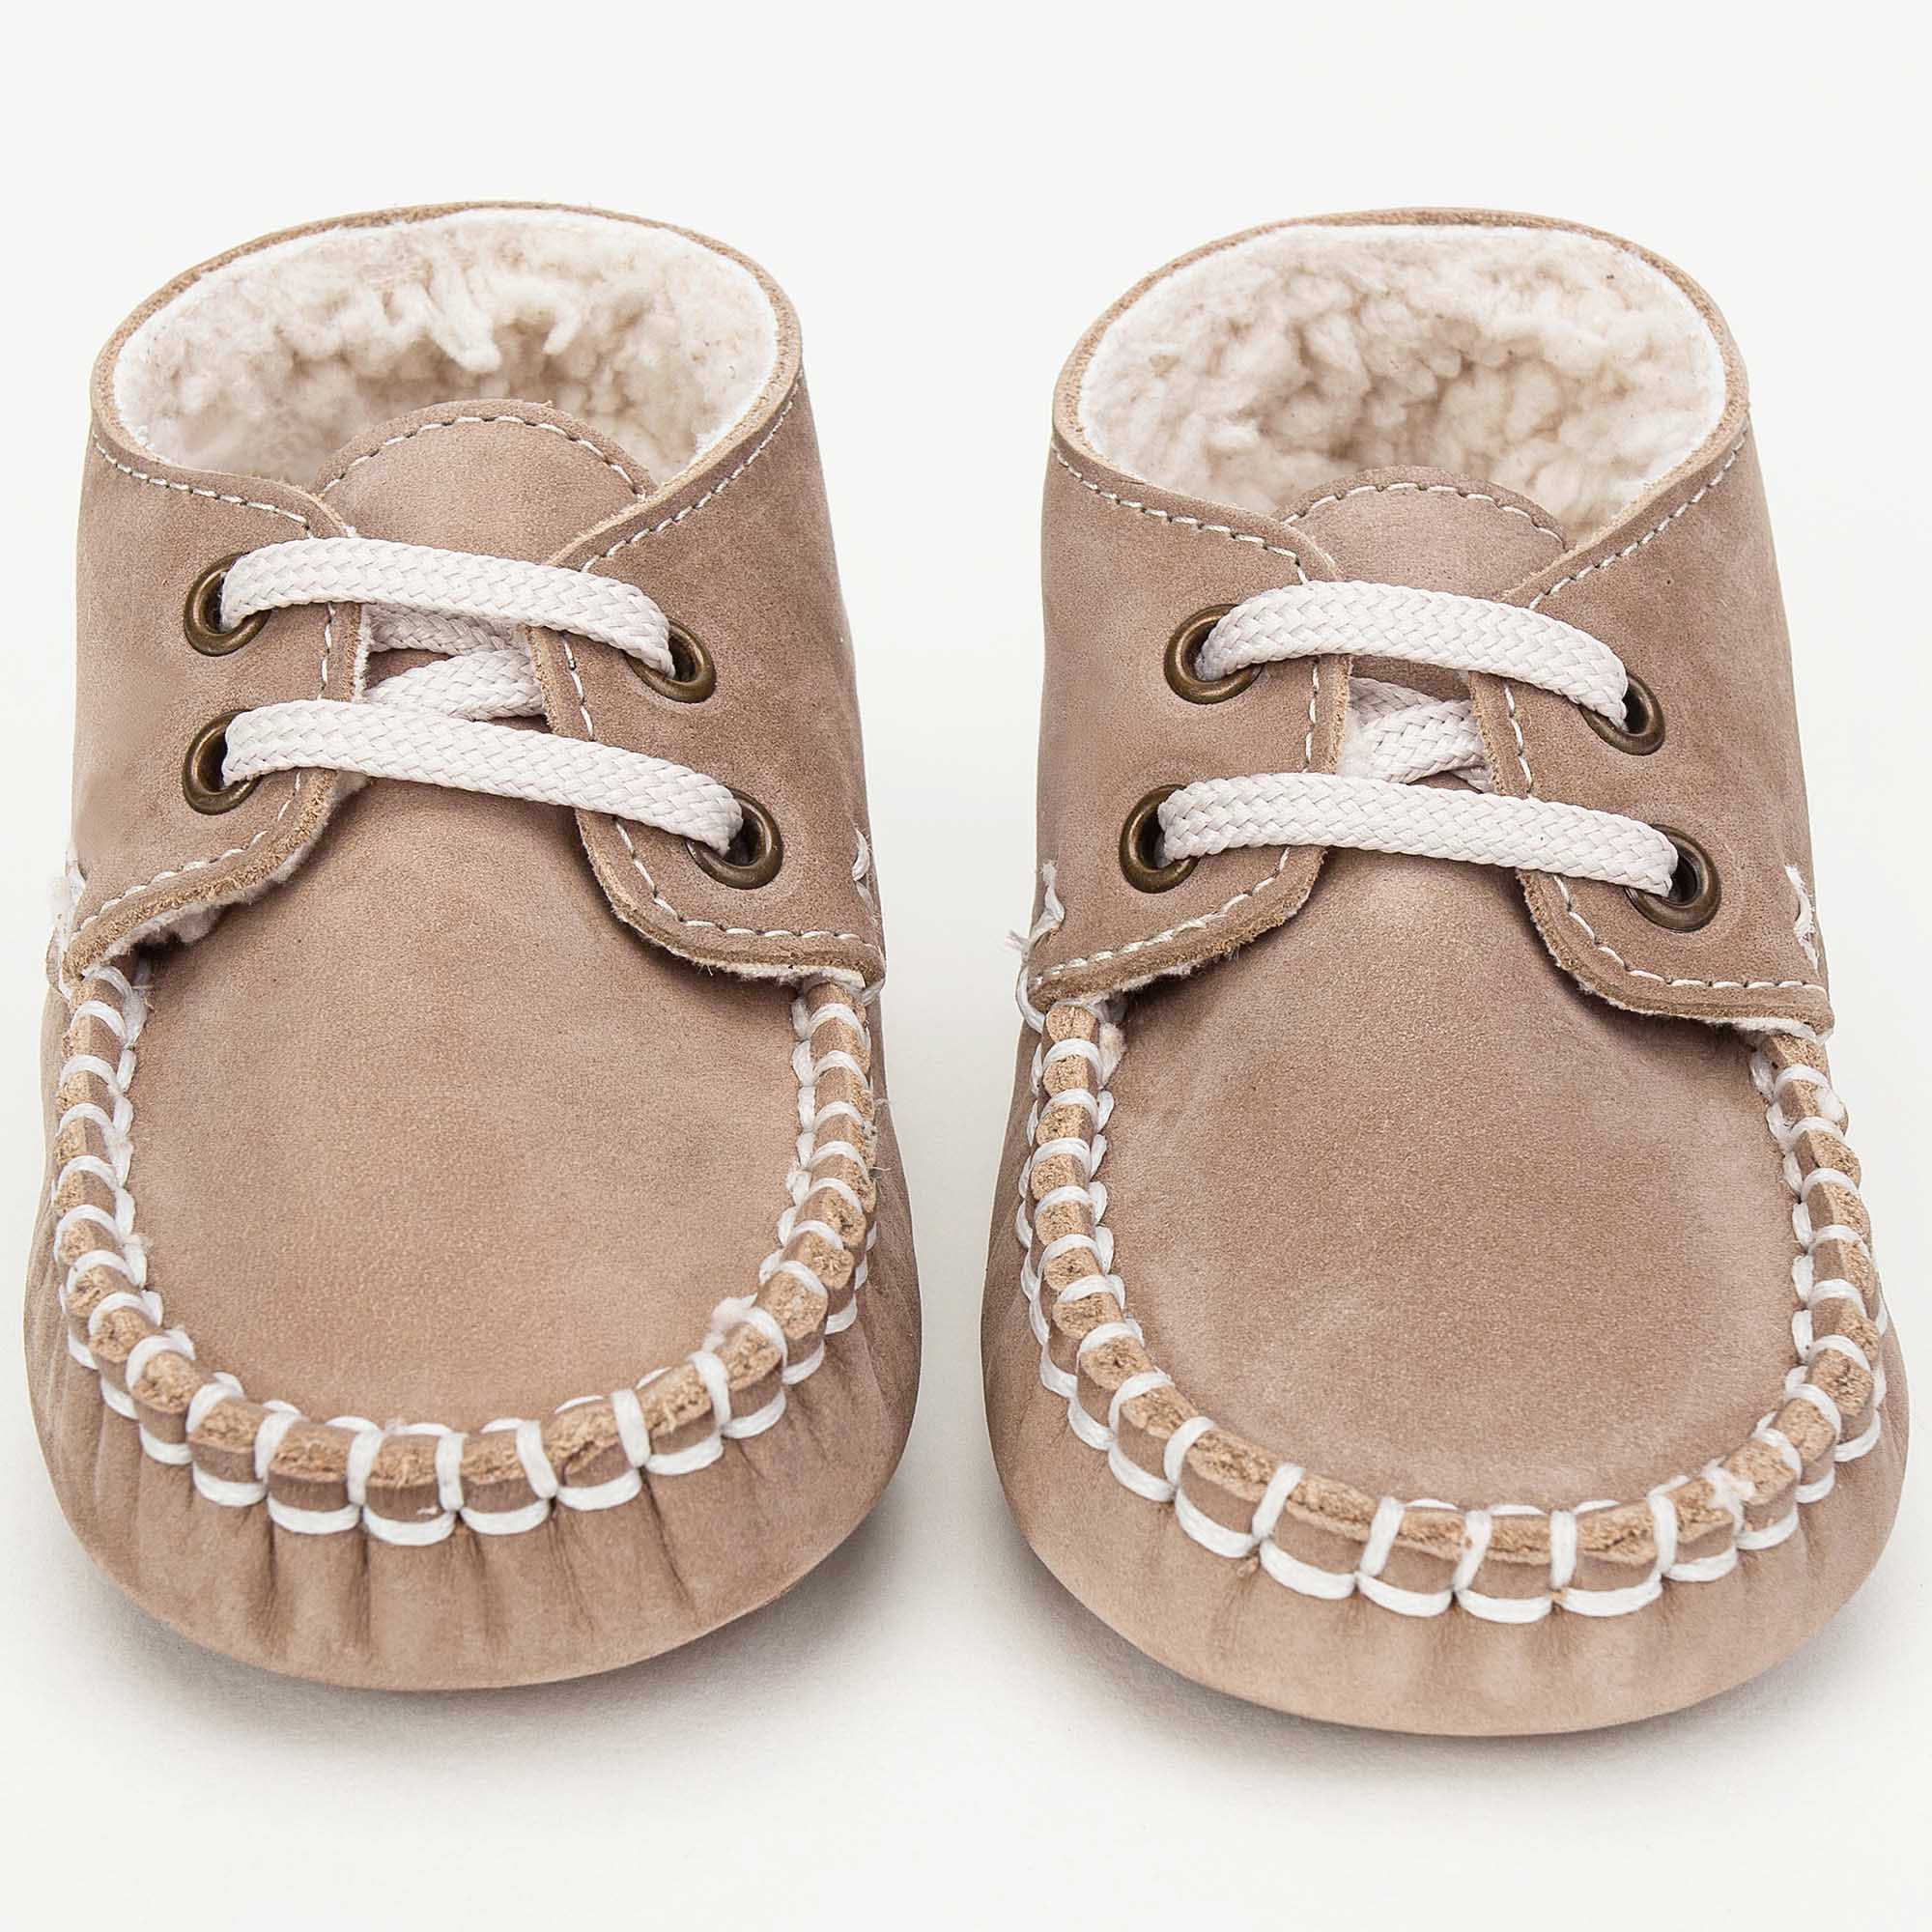 Boys & Girls Beige Suede Mooring Rope Leather  Loafers